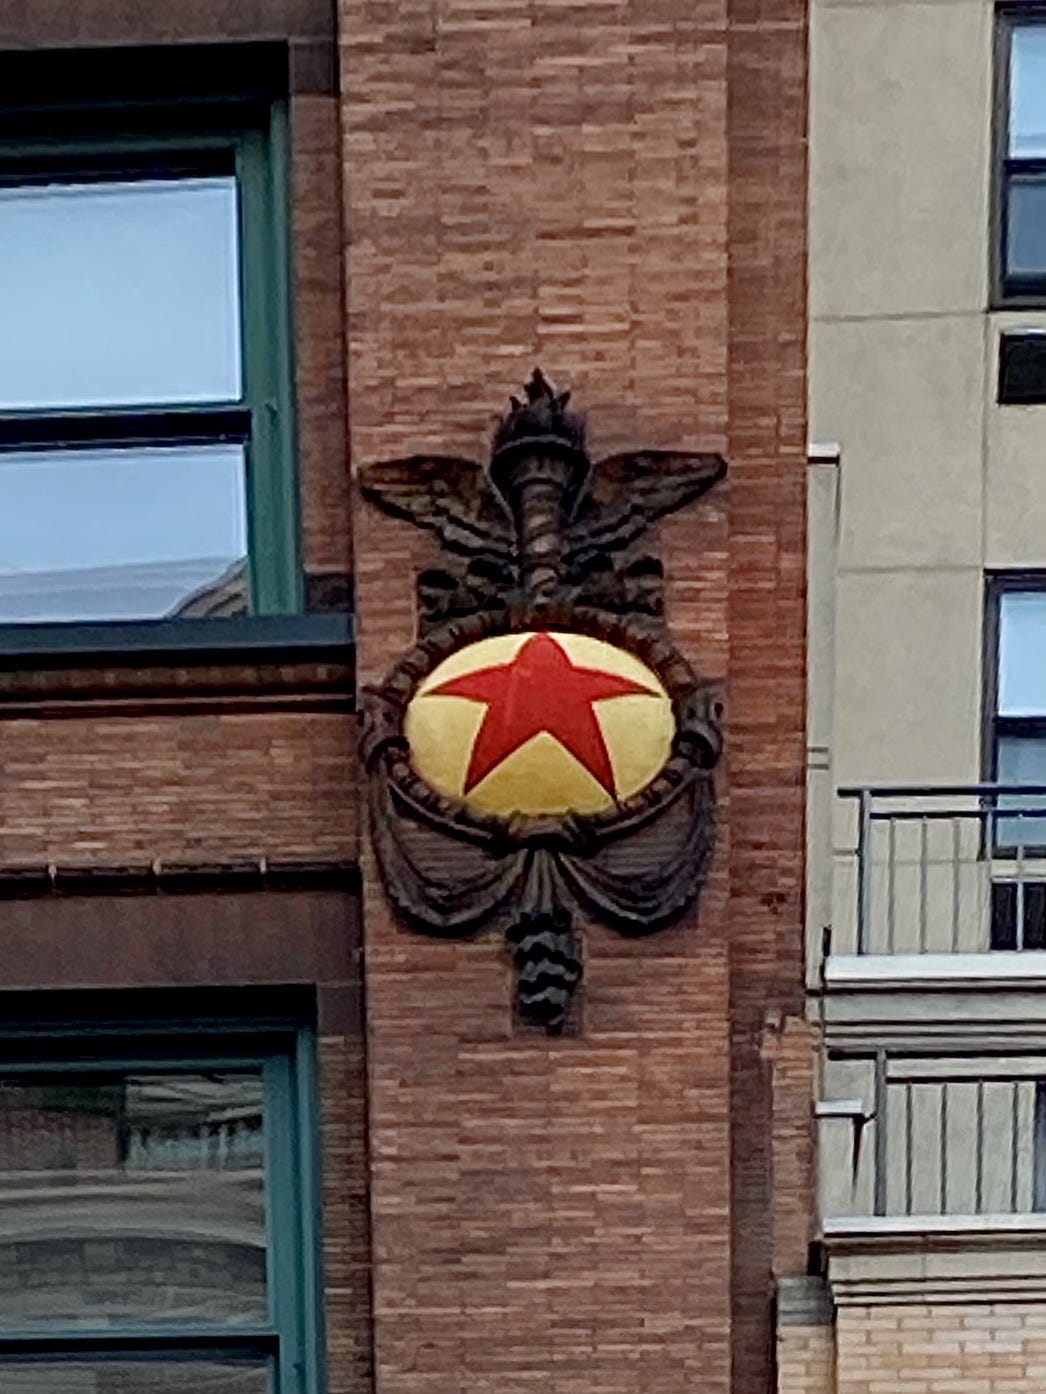 Decorative mason work of a red star in a cream oval with an engraved, winged torch above it.